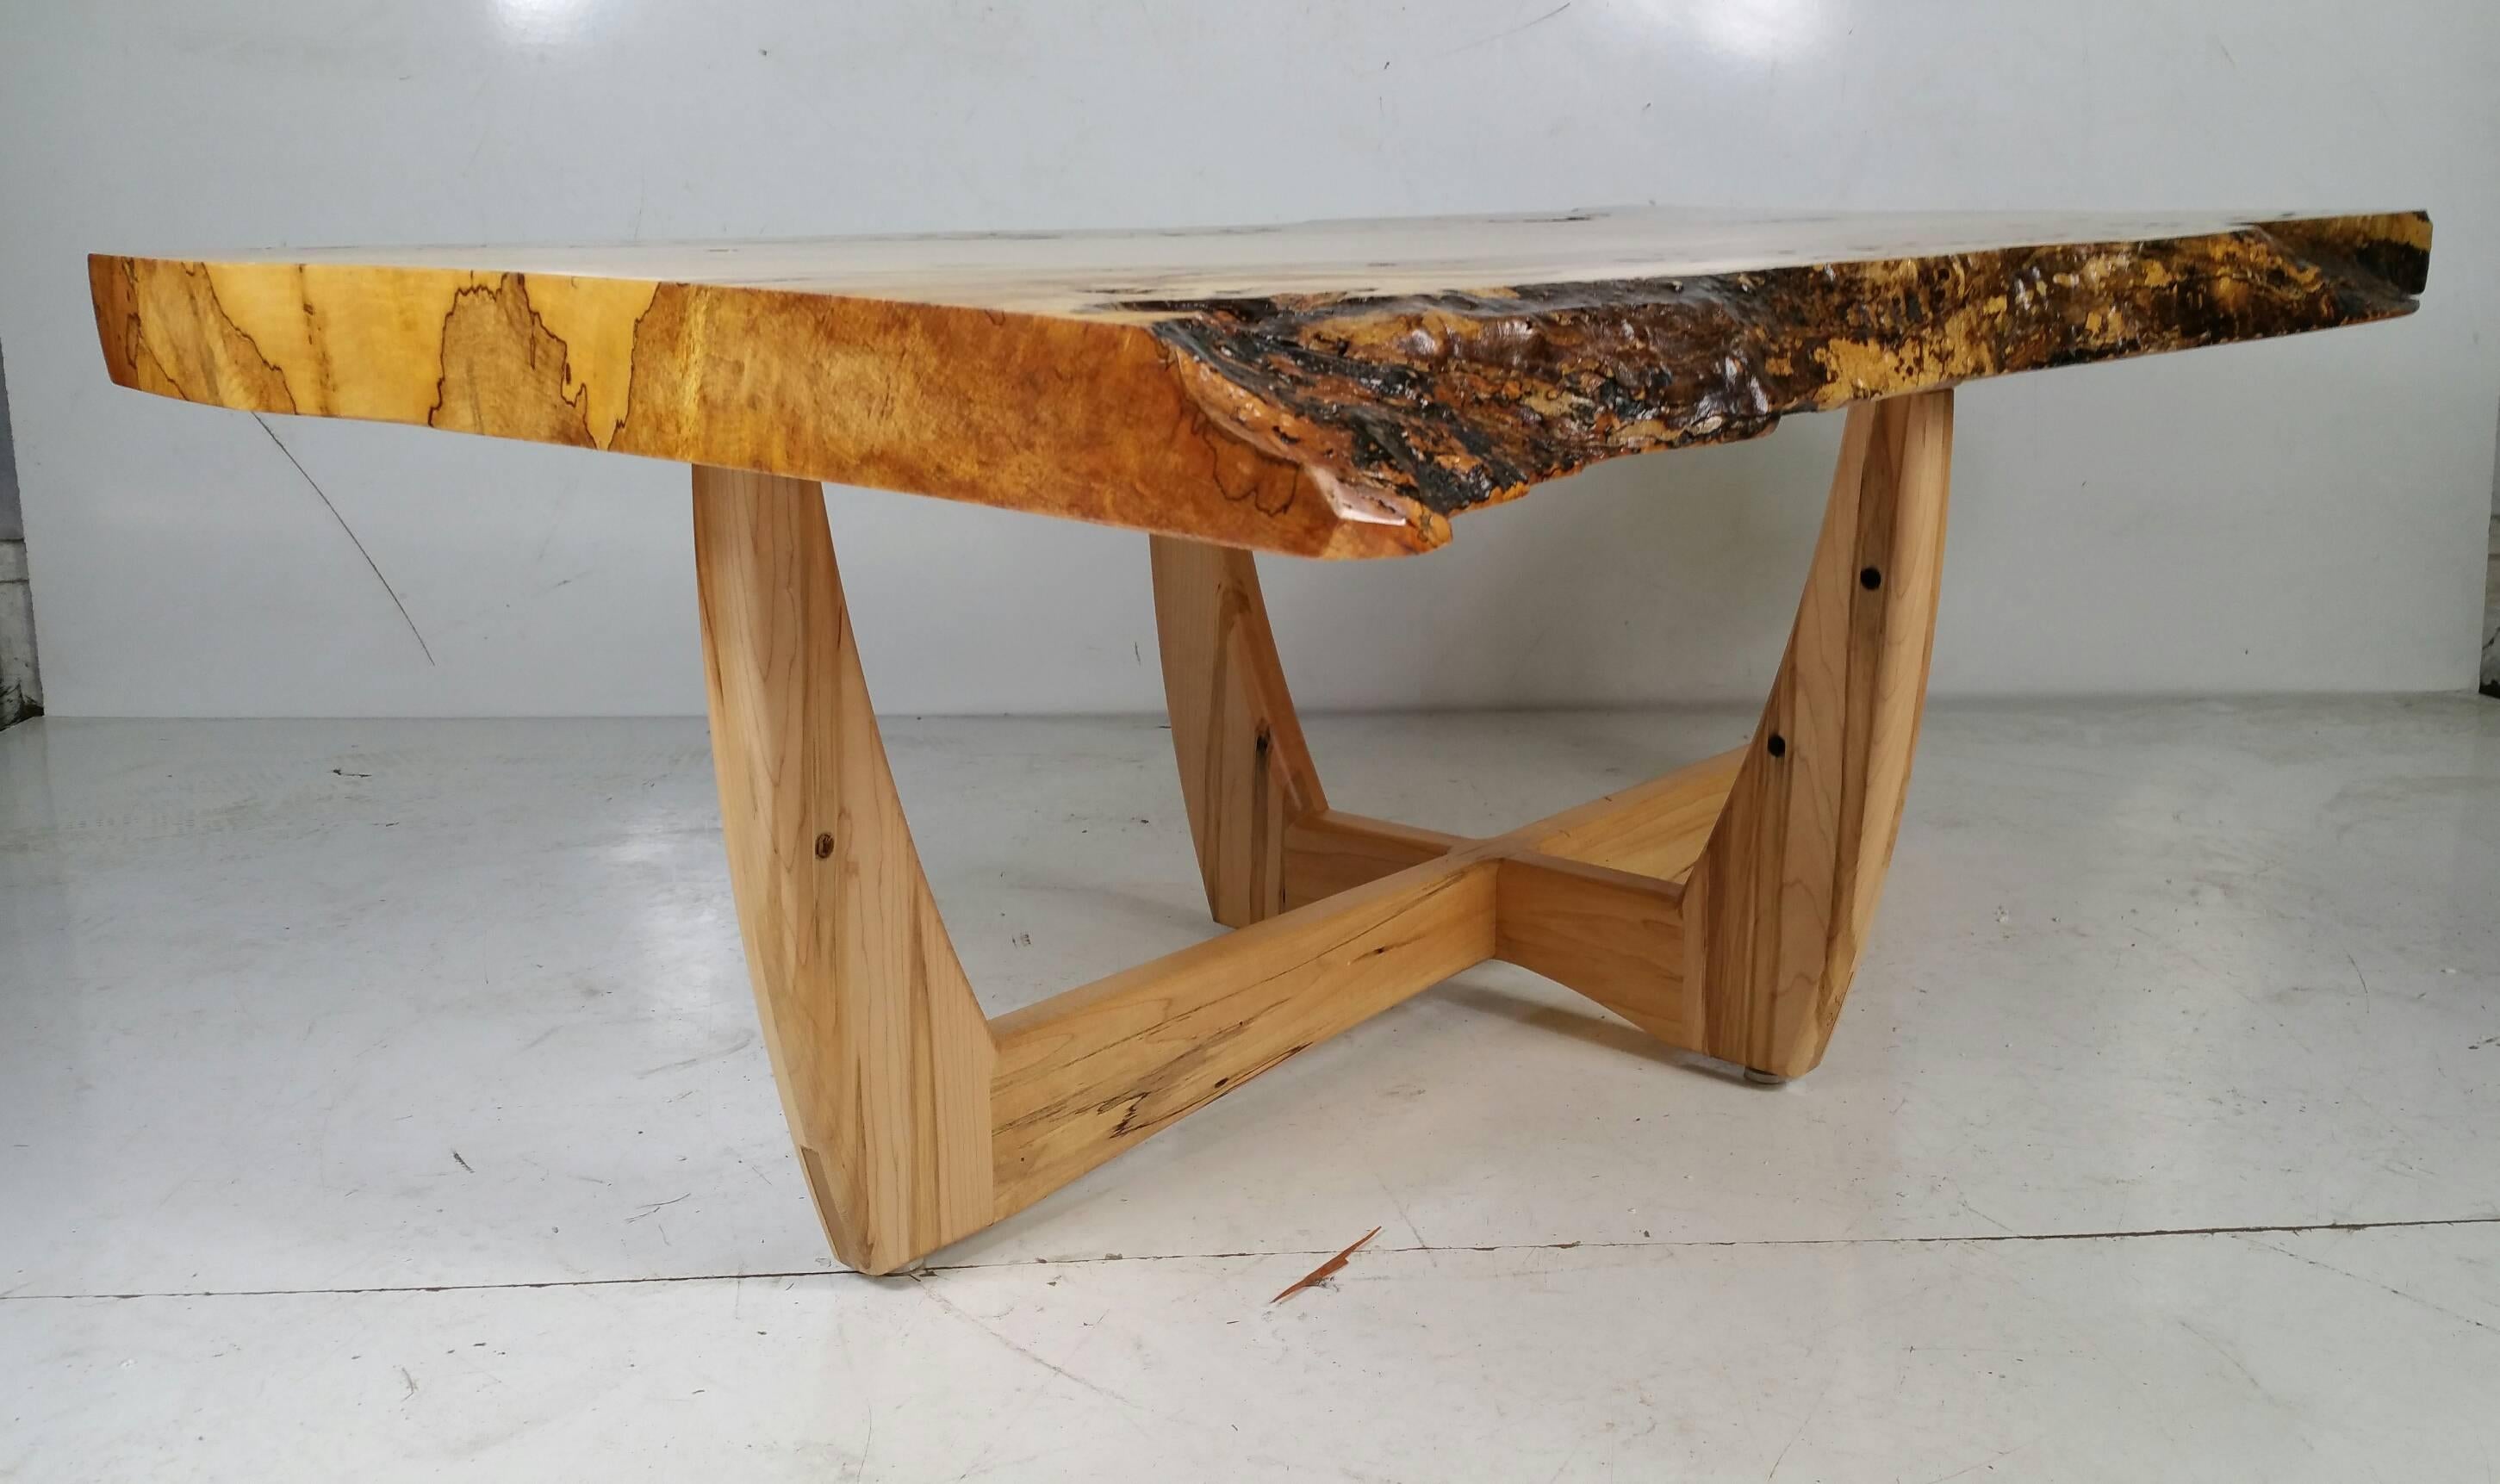 Figured spalted maple wood modernist coffee table, Griff Logan exhibits:
2013 Arts Council For Wyoming County, Perry, NY, “Local Color”
2007–present Ashwood Artisans, East Aurora, NY

Education:
1987-88 Graphic Careers Design School, Rochester,